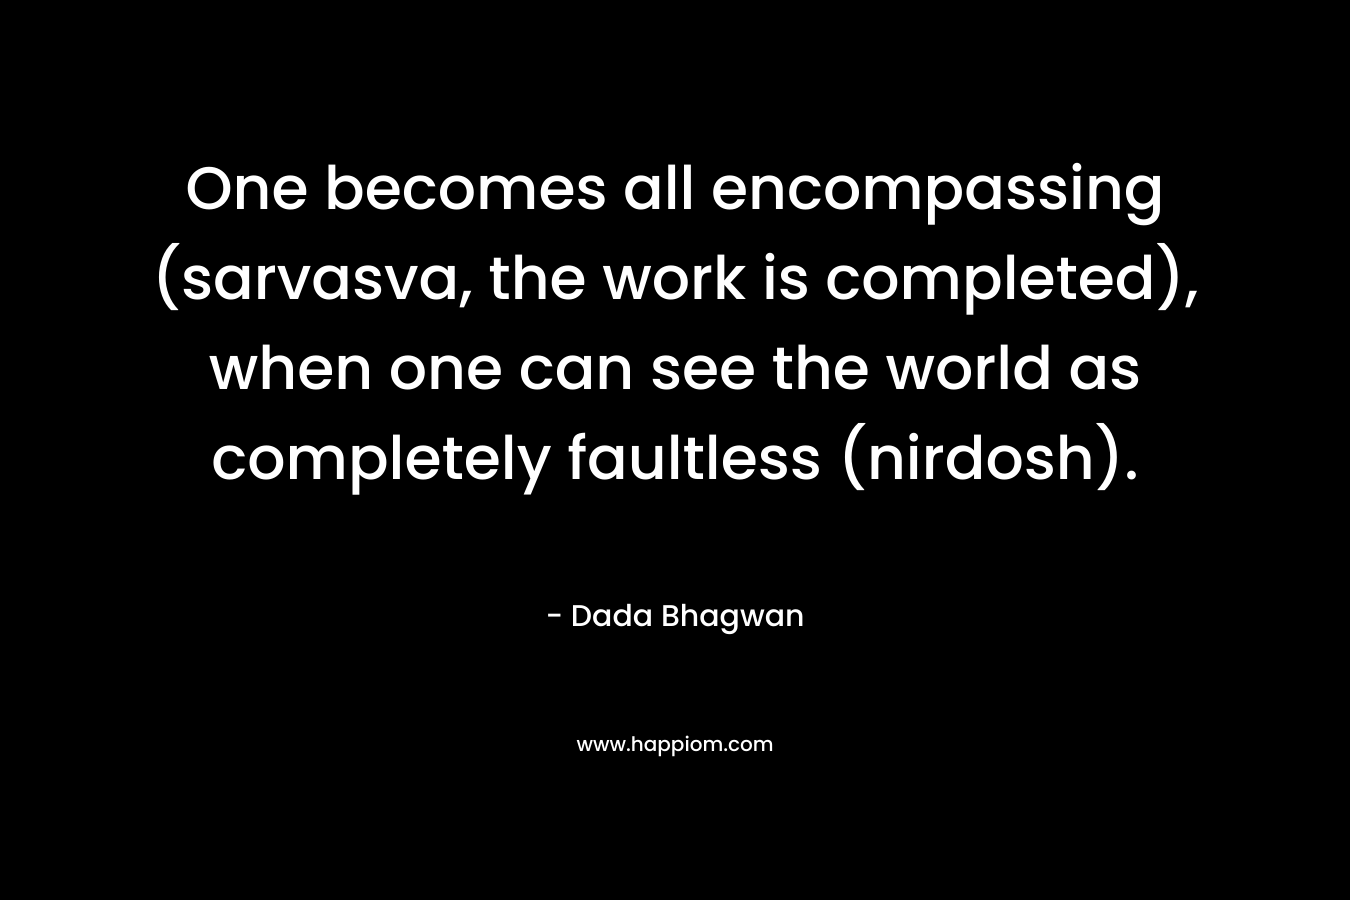 One becomes all encompassing (sarvasva, the work is completed), when one can see the world as completely faultless (nirdosh). – Dada Bhagwan